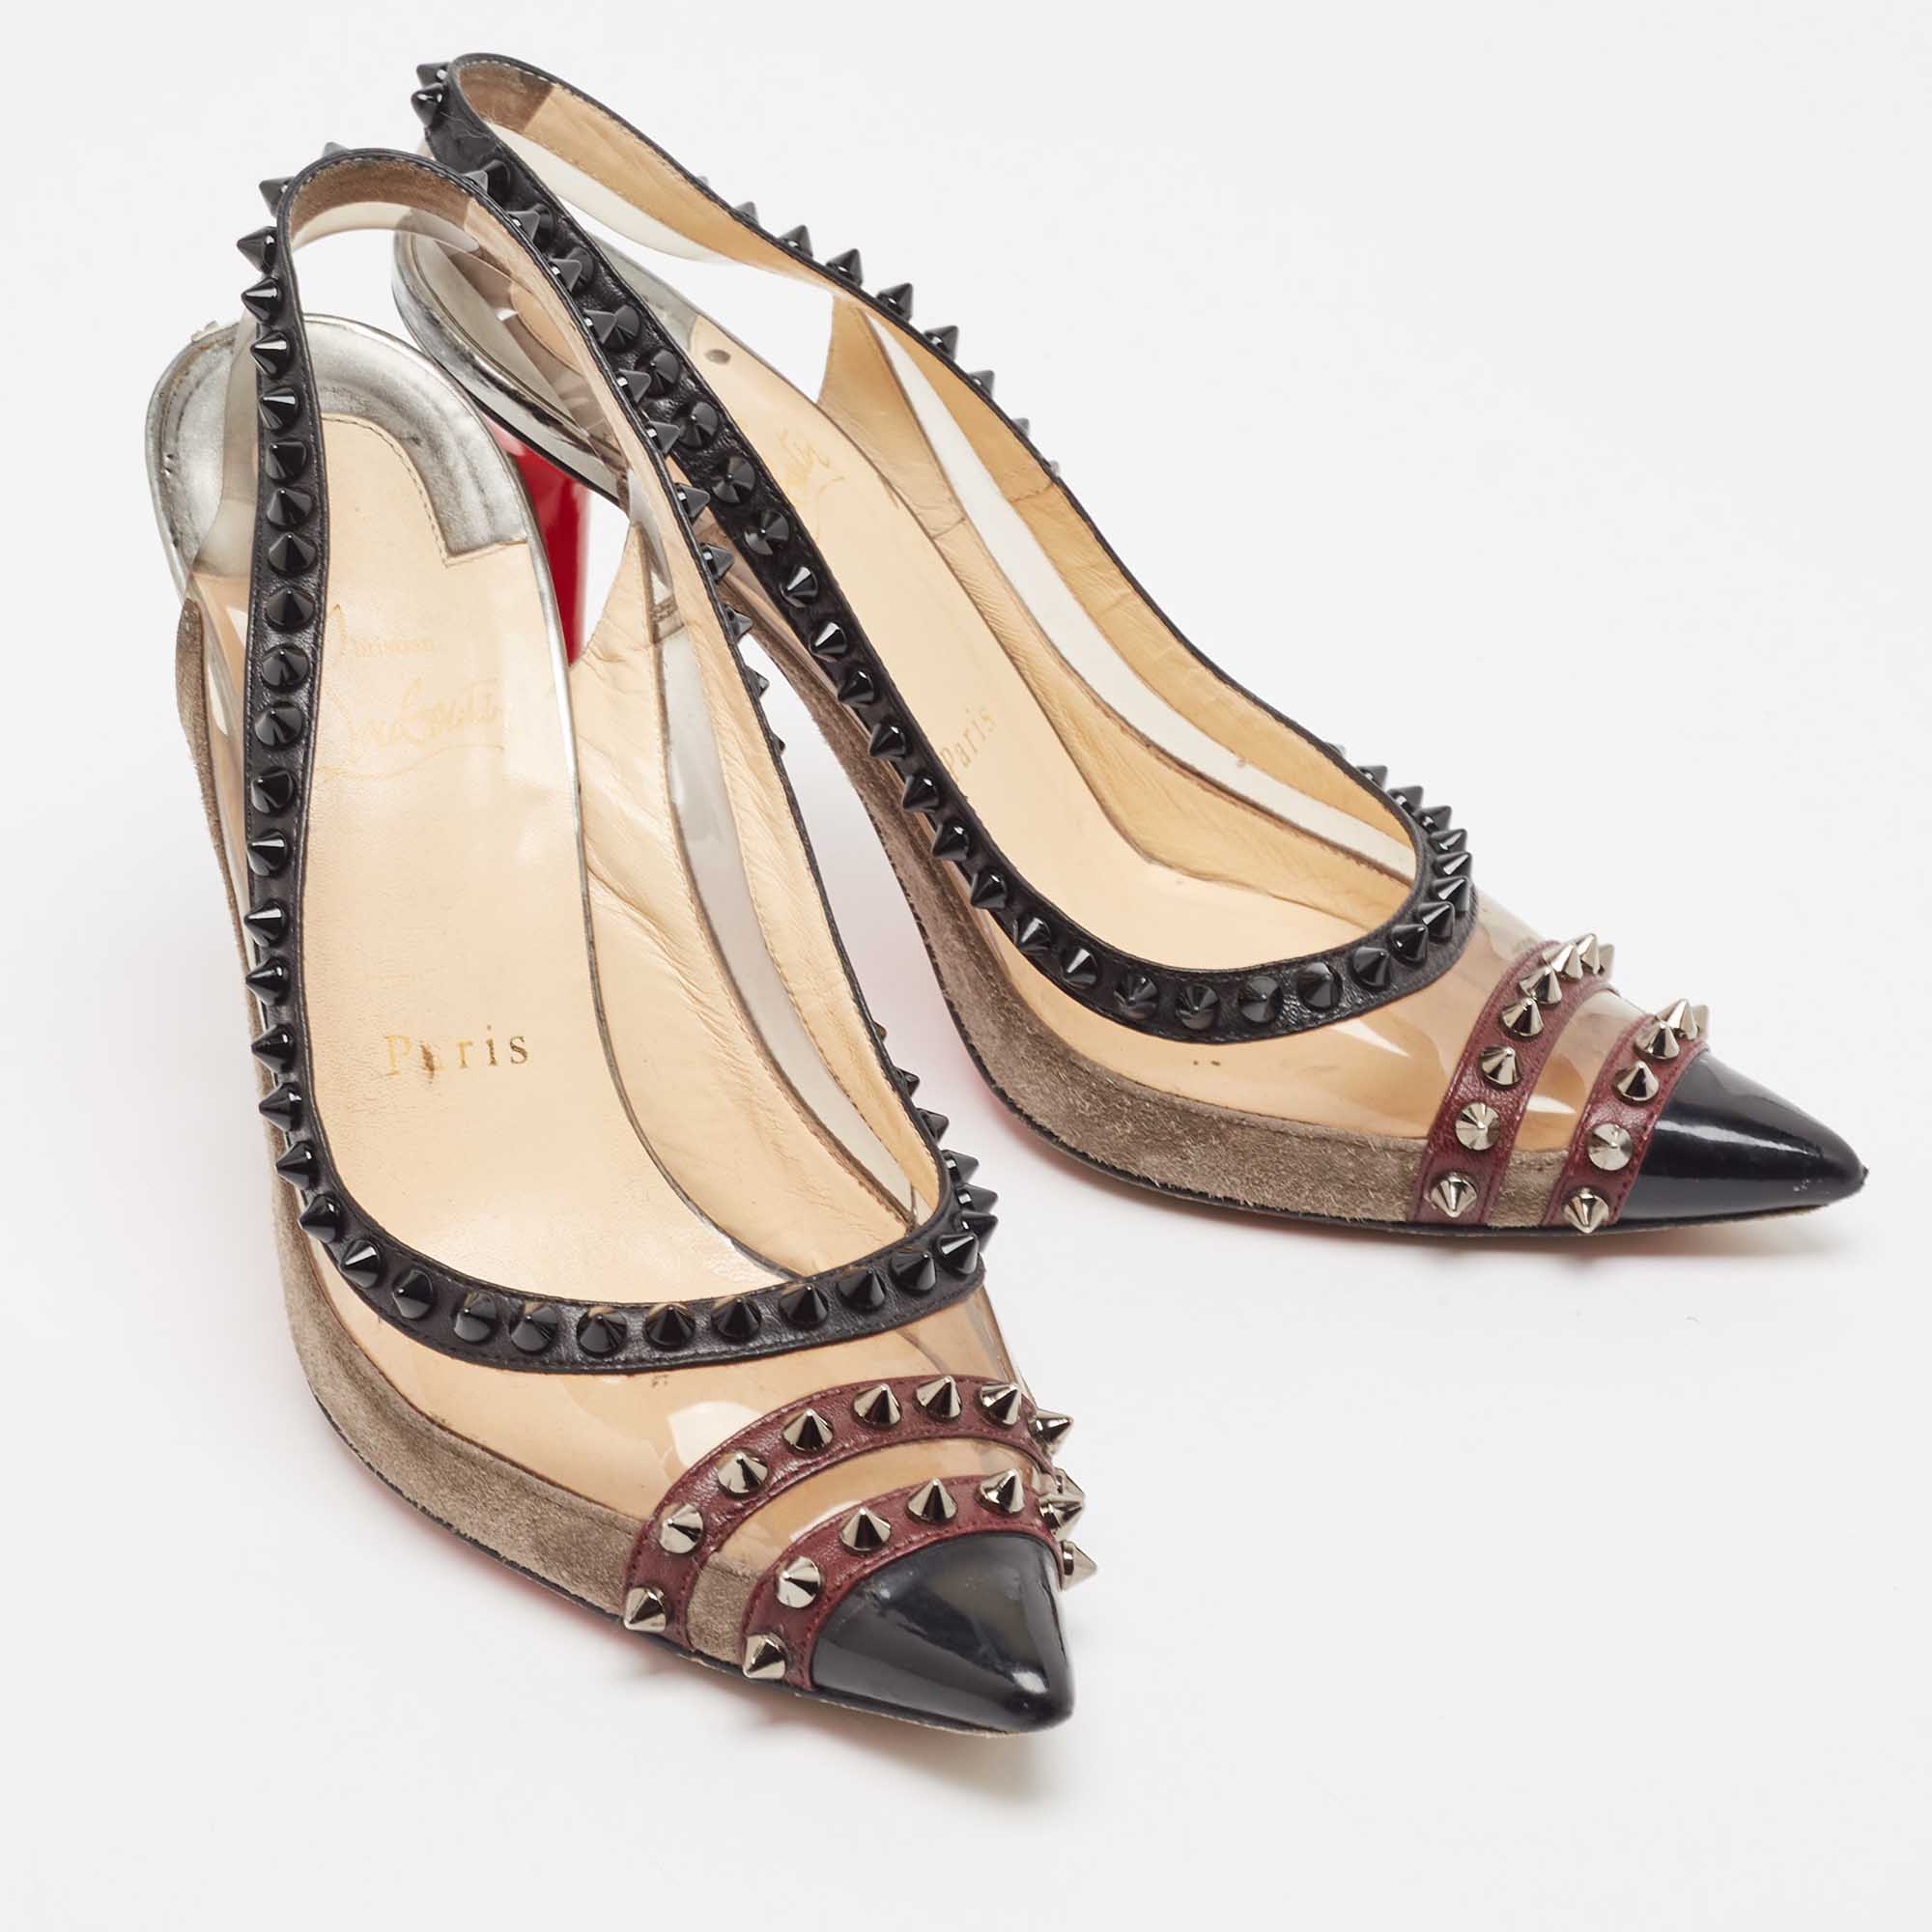 Christian Louboutin Tricolor Leather And PVC Spiked Slingback Pumps Size 37